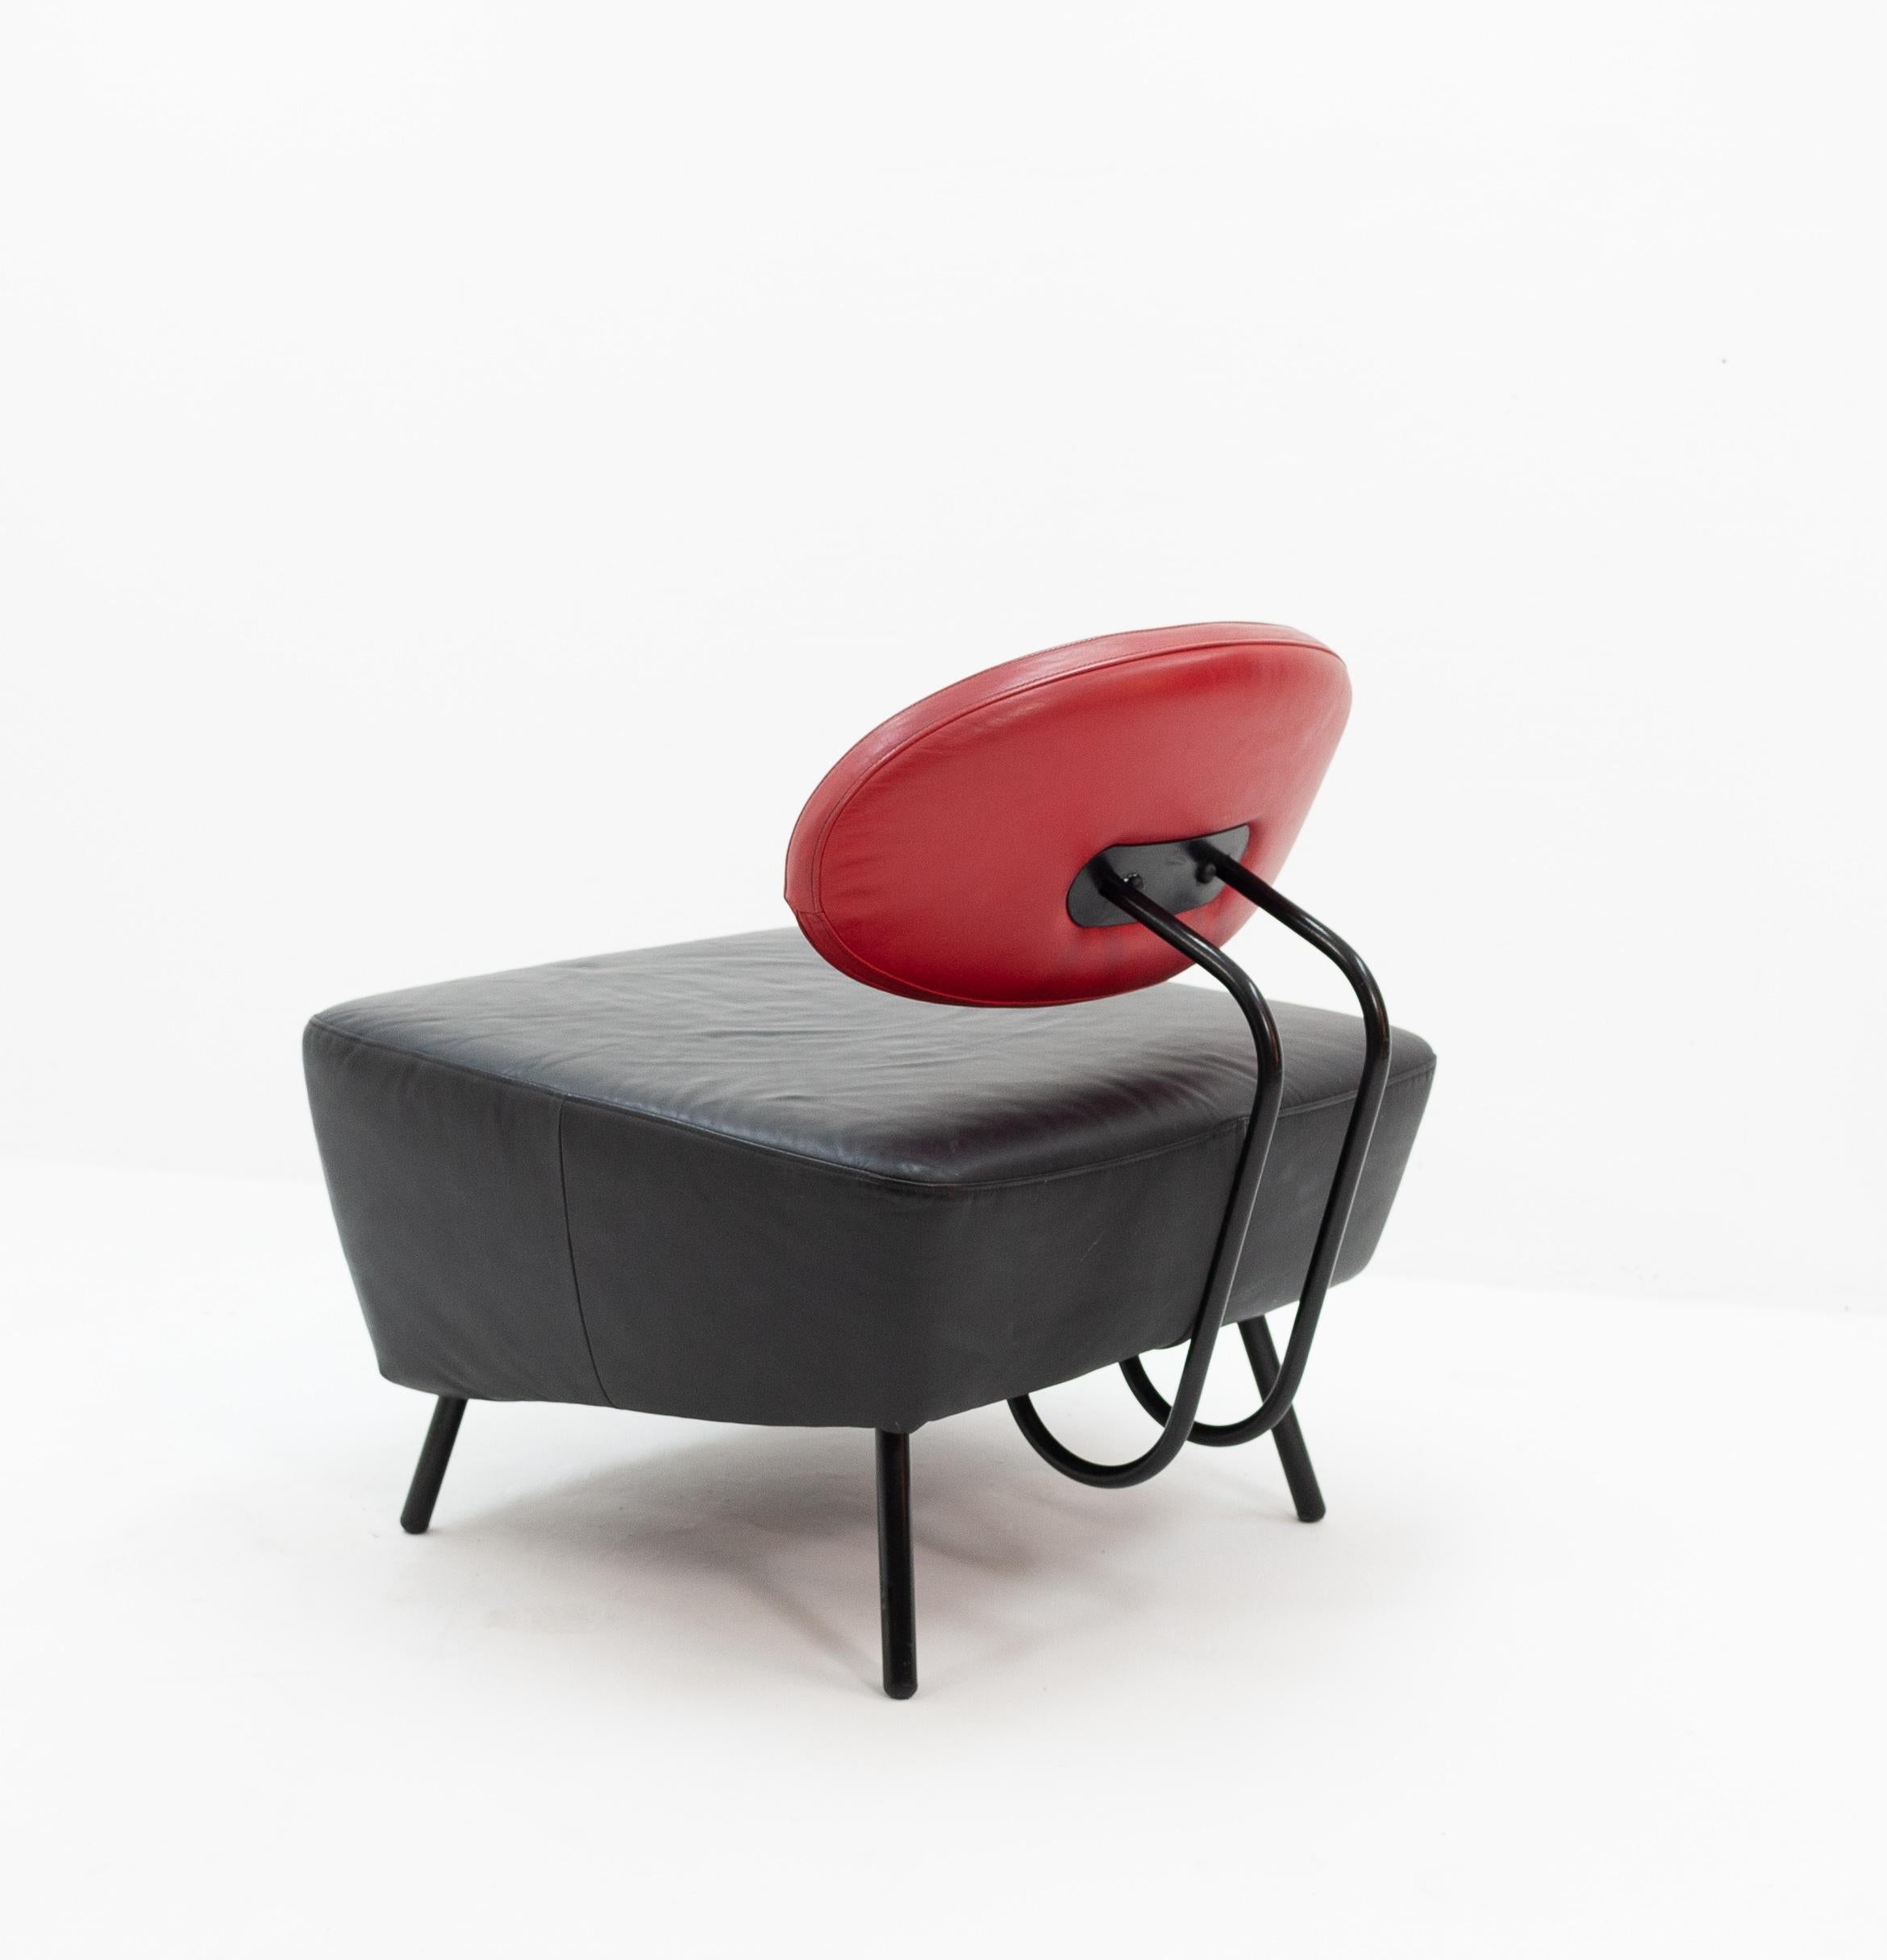 Modern Black on Red Leather Lounge Chair by Staccato Van IQ for Multifoam